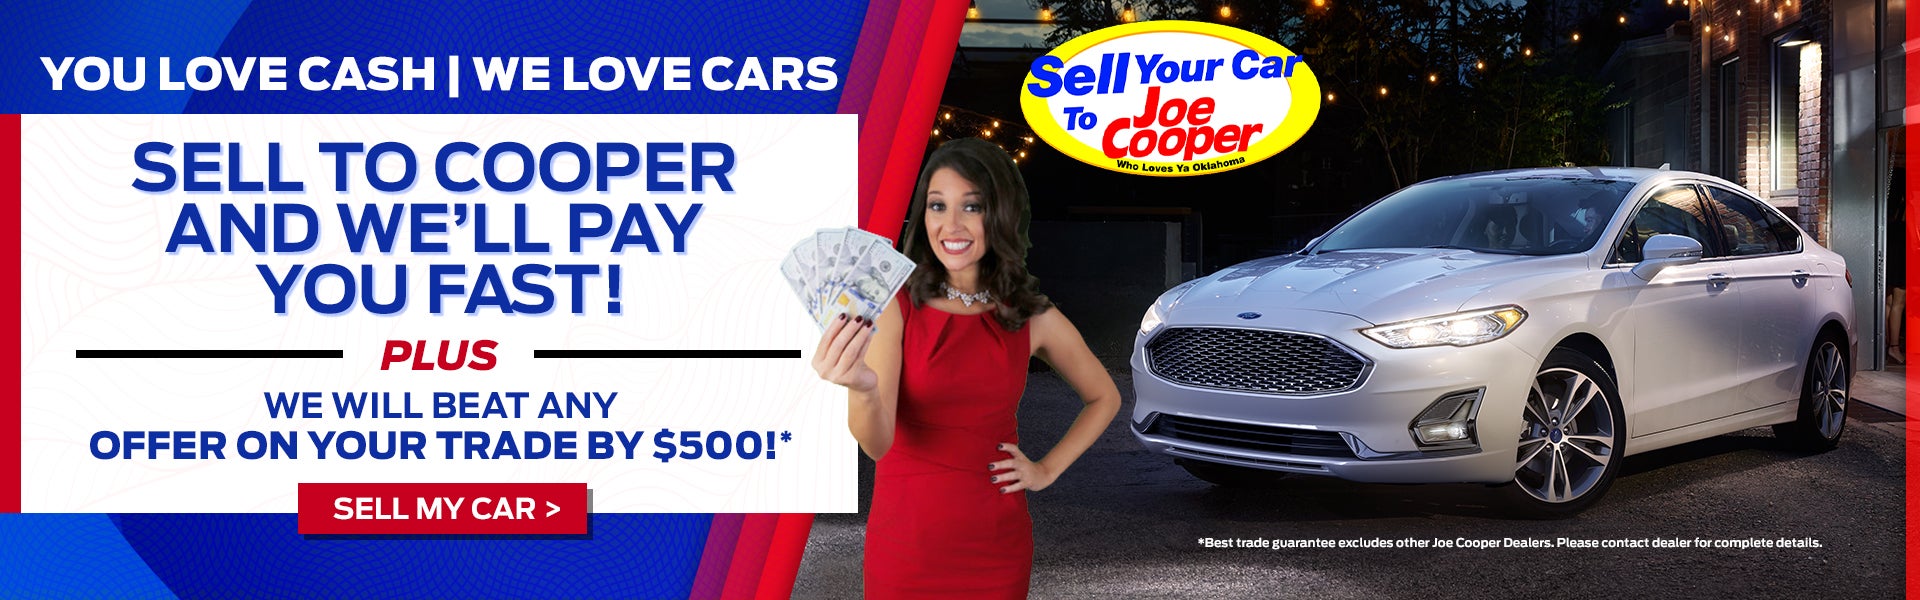 Sell Your Car to Cooper in OKC, OK